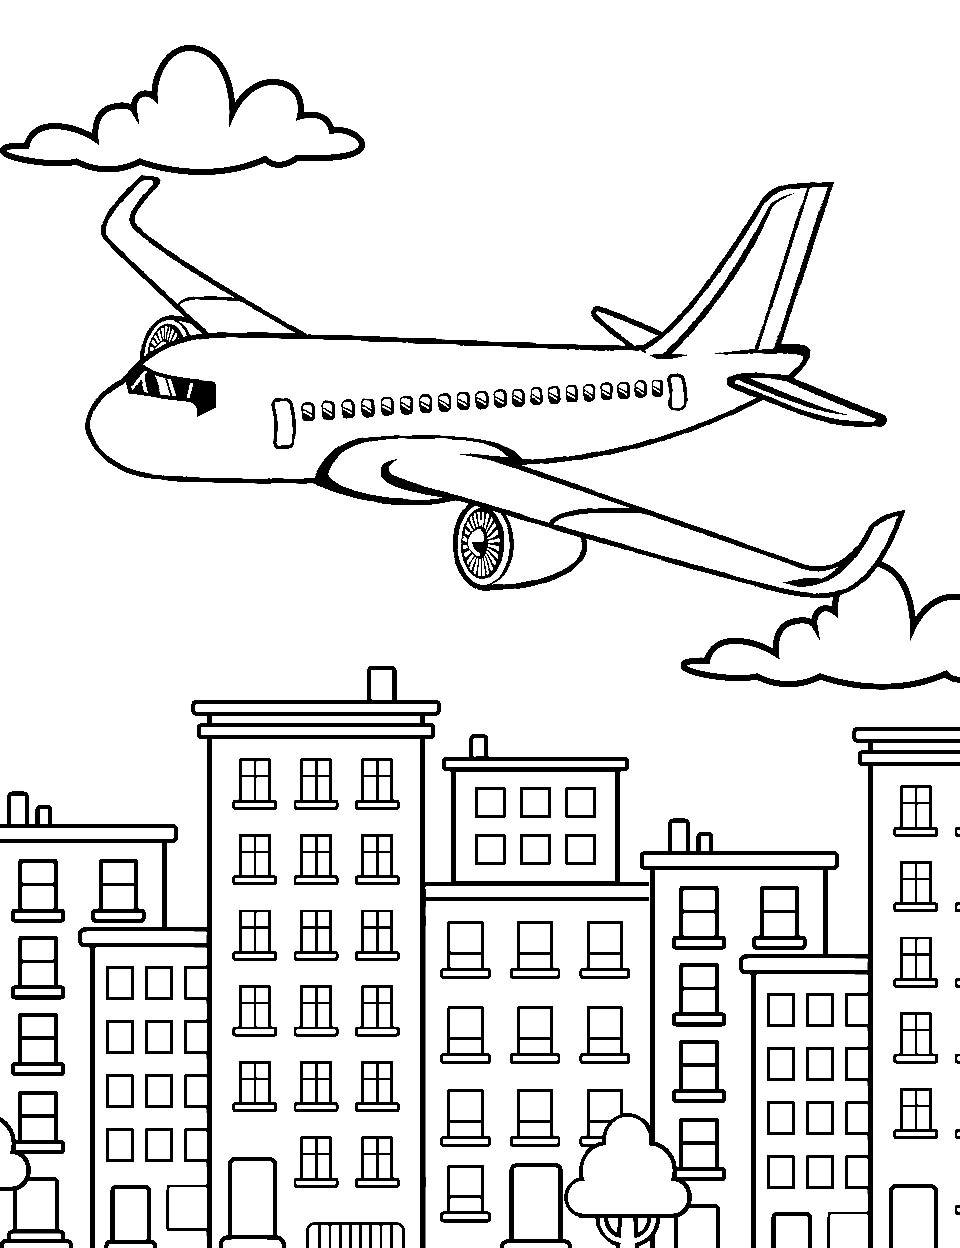 Airplane Over the City Coloring Page - An airplane flying over a simple cityscape.